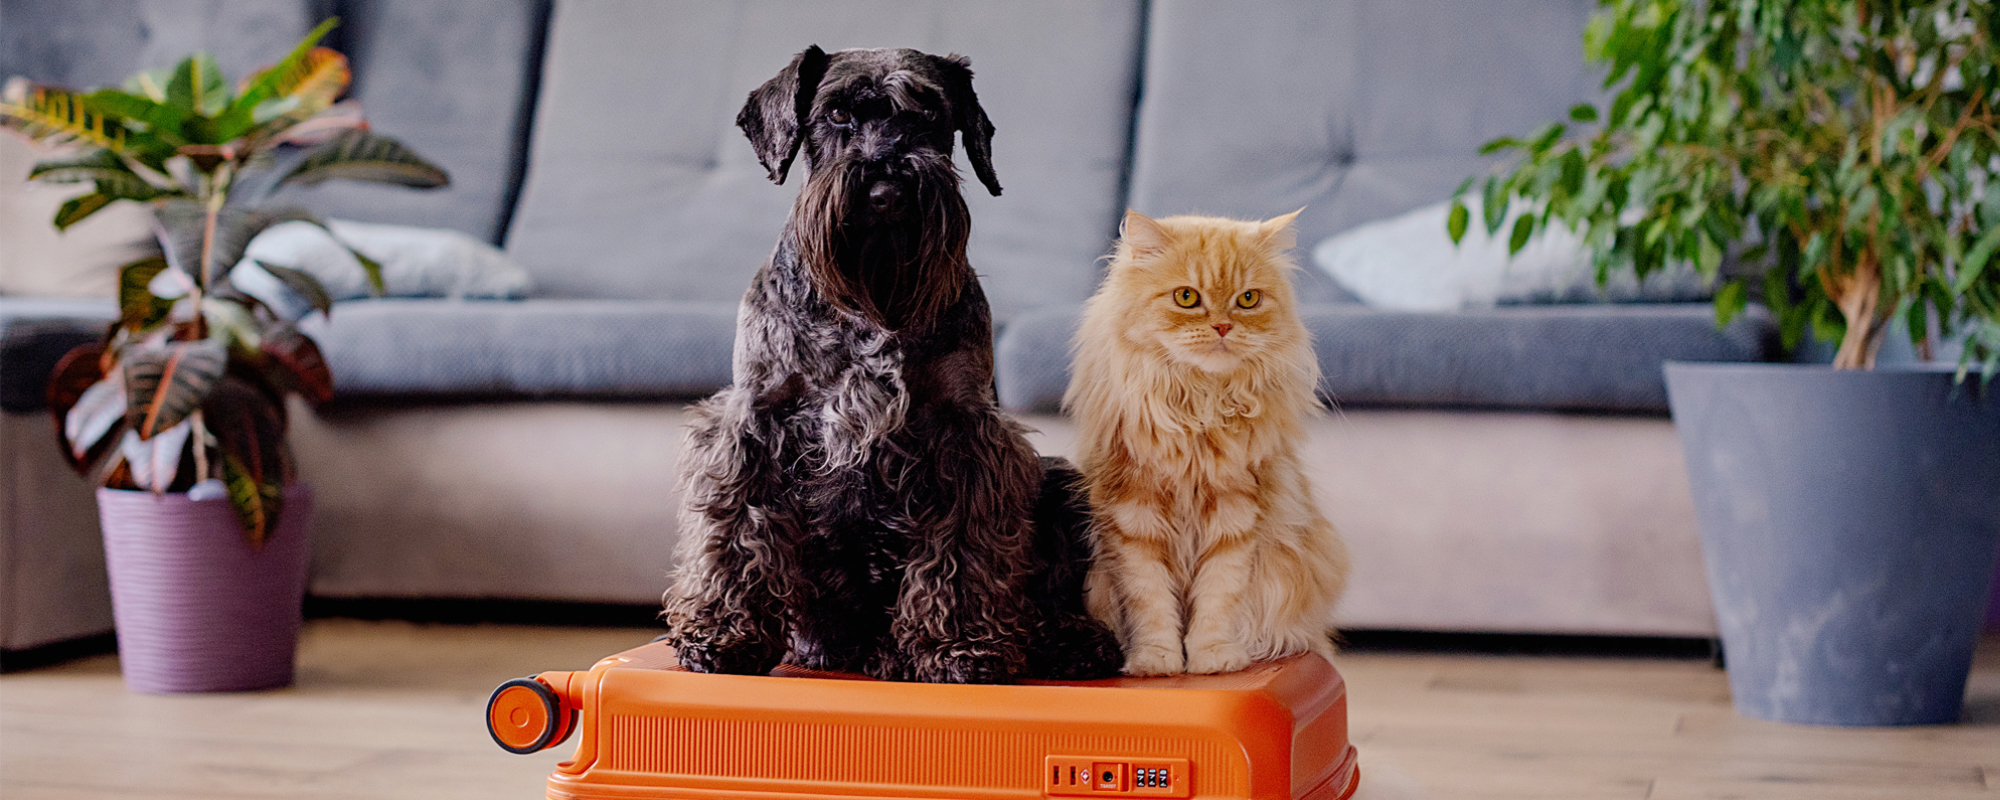 dog and cat on suitcase